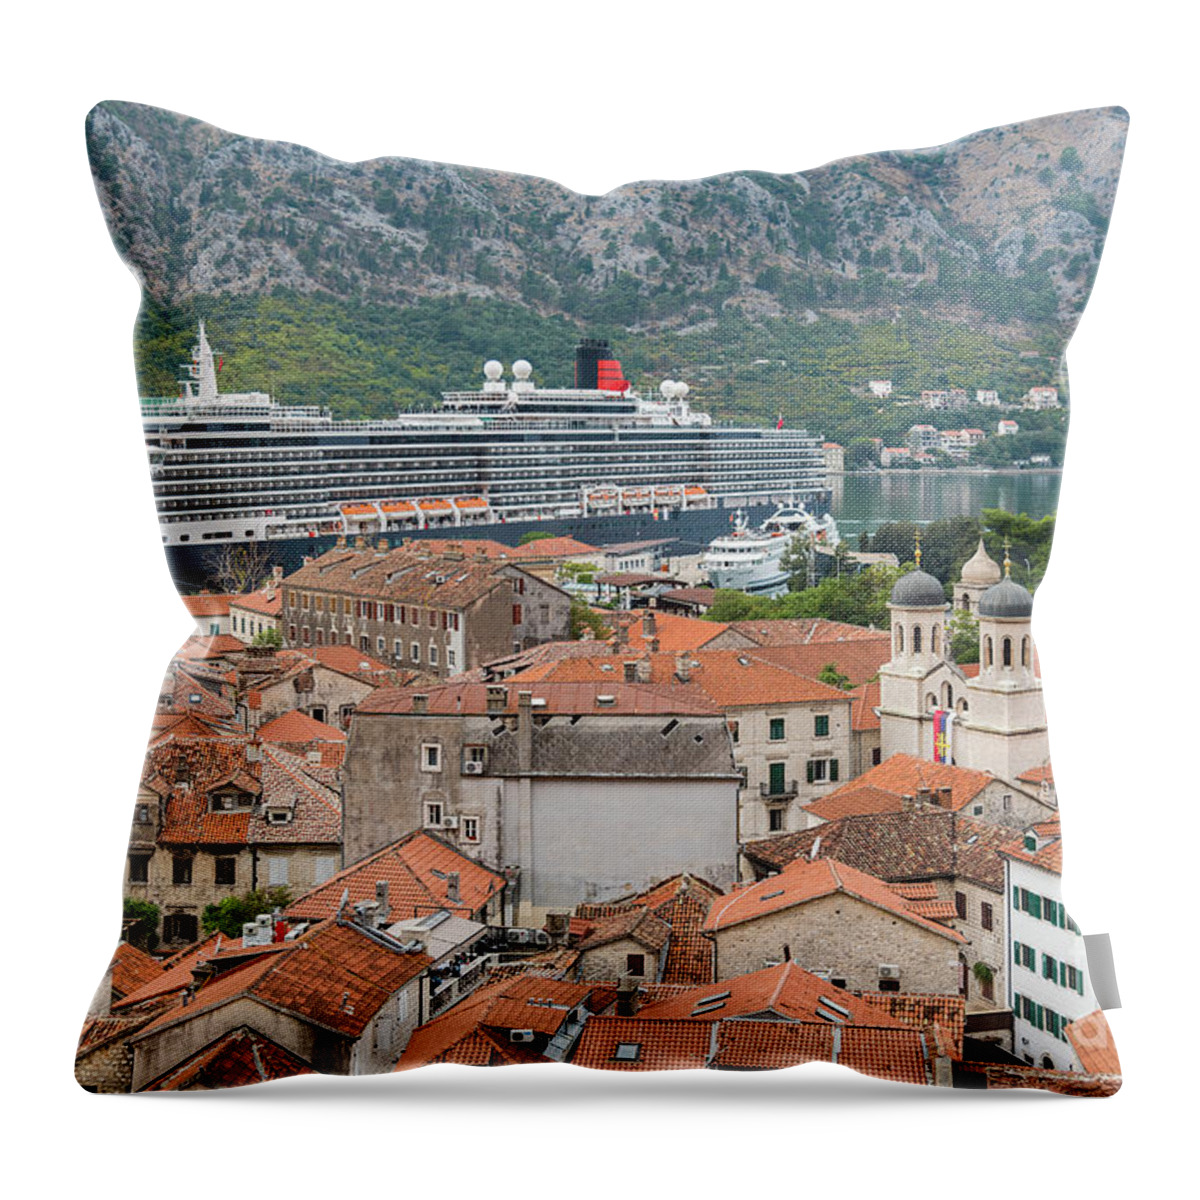 Montenegro Throw Pillow featuring the photograph Montenegro Kotor Rooftops And Port by Antony McAulay